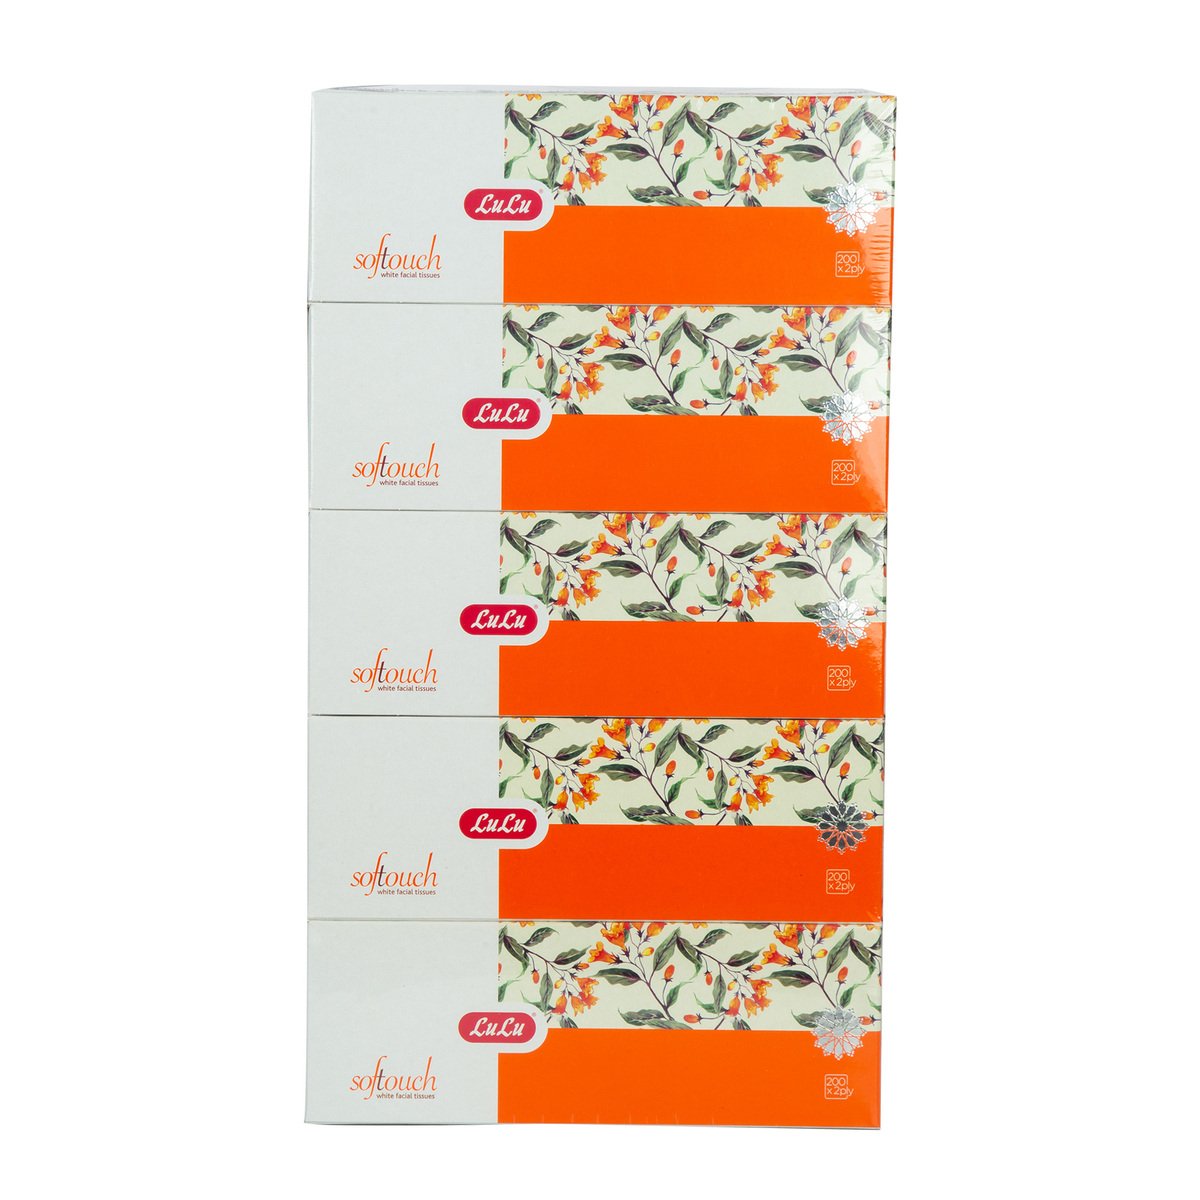 LuLu Soft Touch White Facial Tissue Rose 2ply 200 Sheets 5pcs